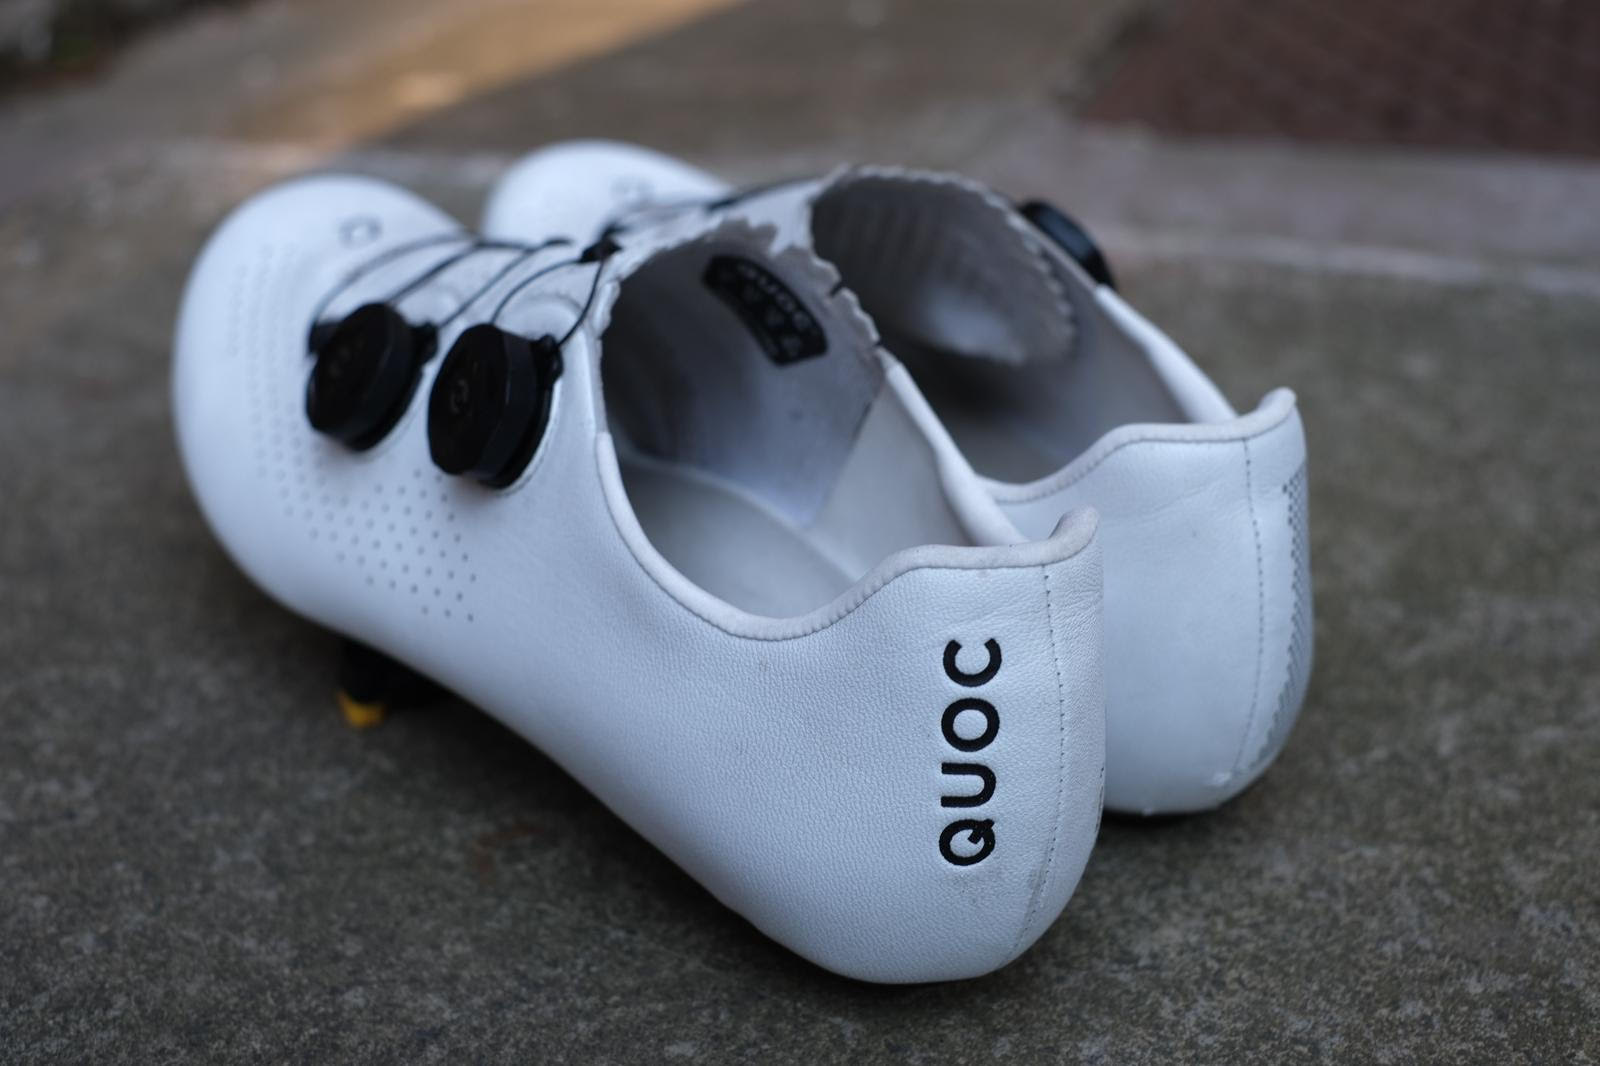 Quoc Mono II cycling shoe review: A performance shoe that does ...